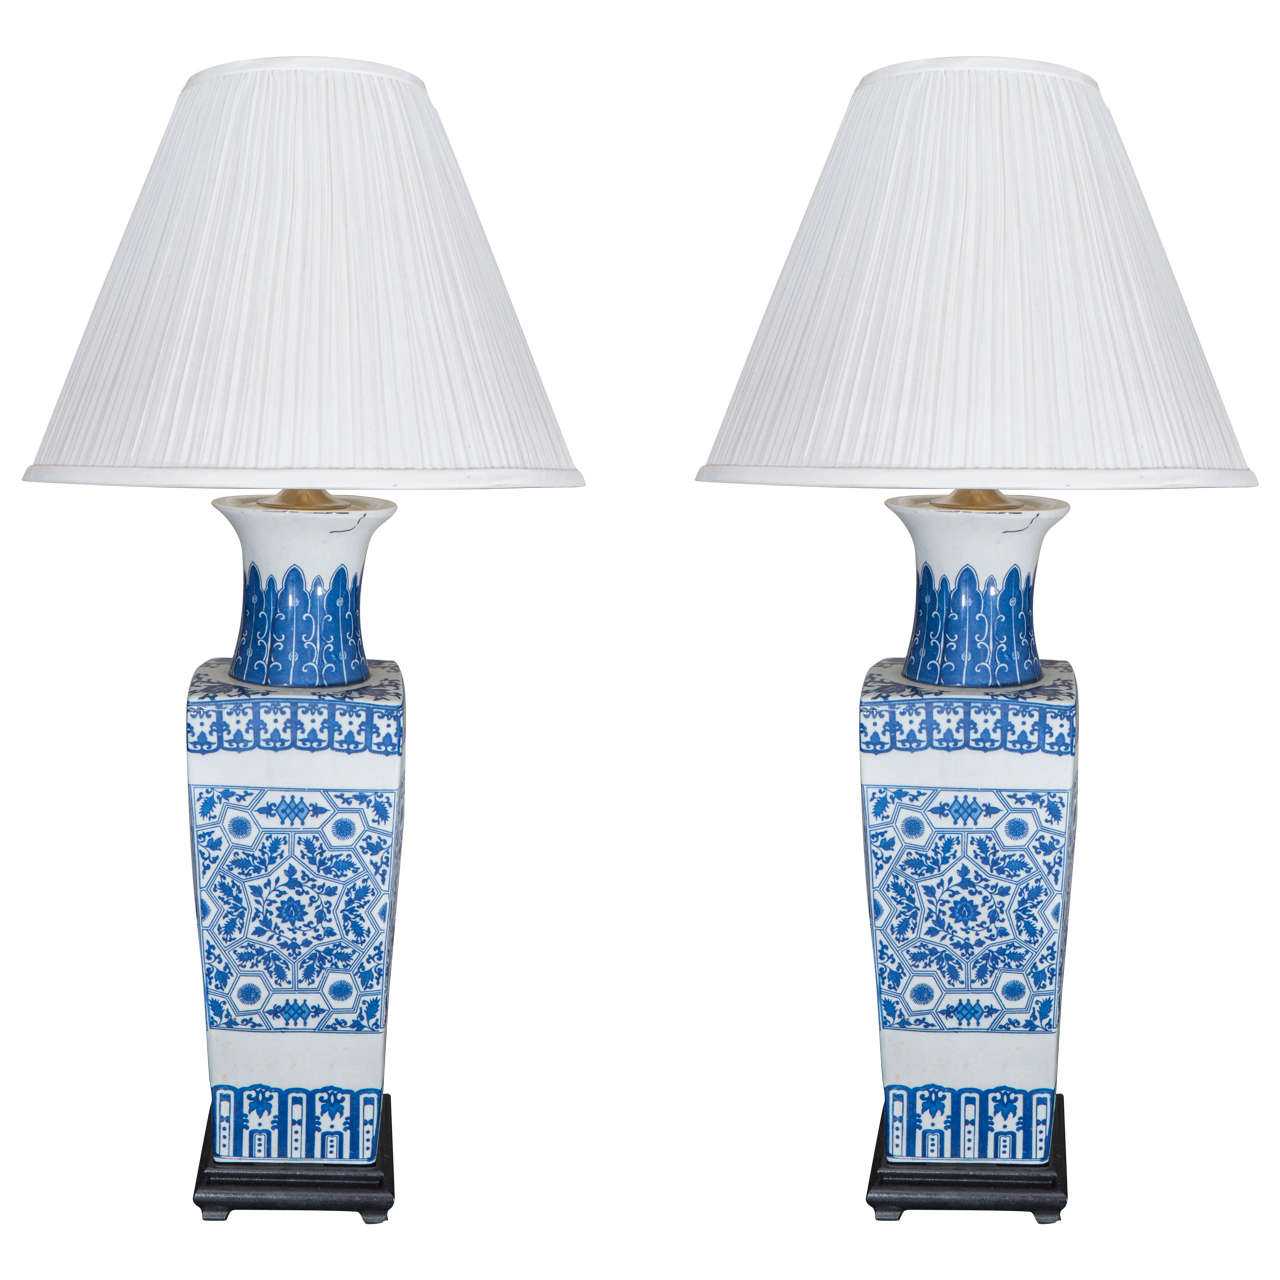 Pair of Chinese Blue and White Porcelain Vases, Wired as Lamps